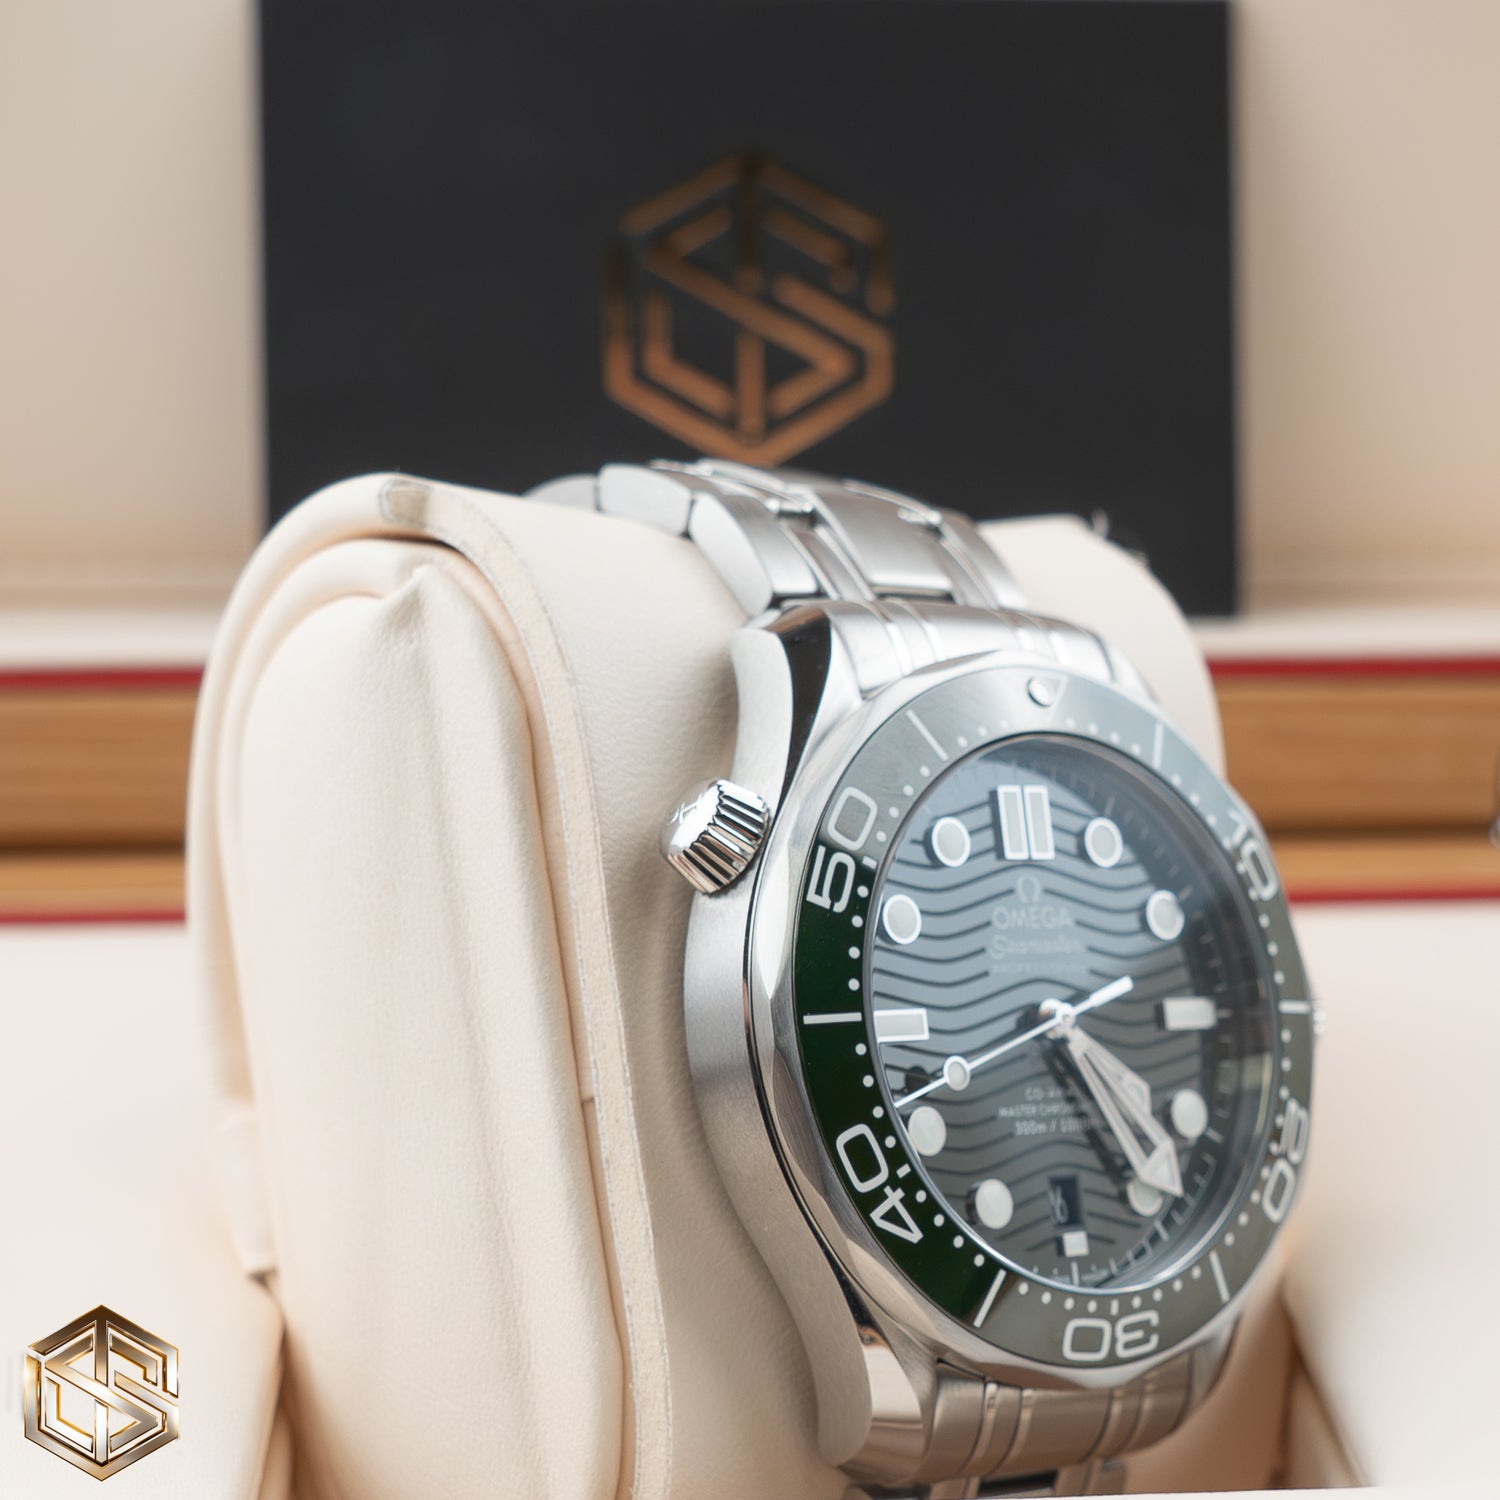 Omega 210.30.42.20.10.001 Seamaster Diver 300m Green Dial 2023 Watch